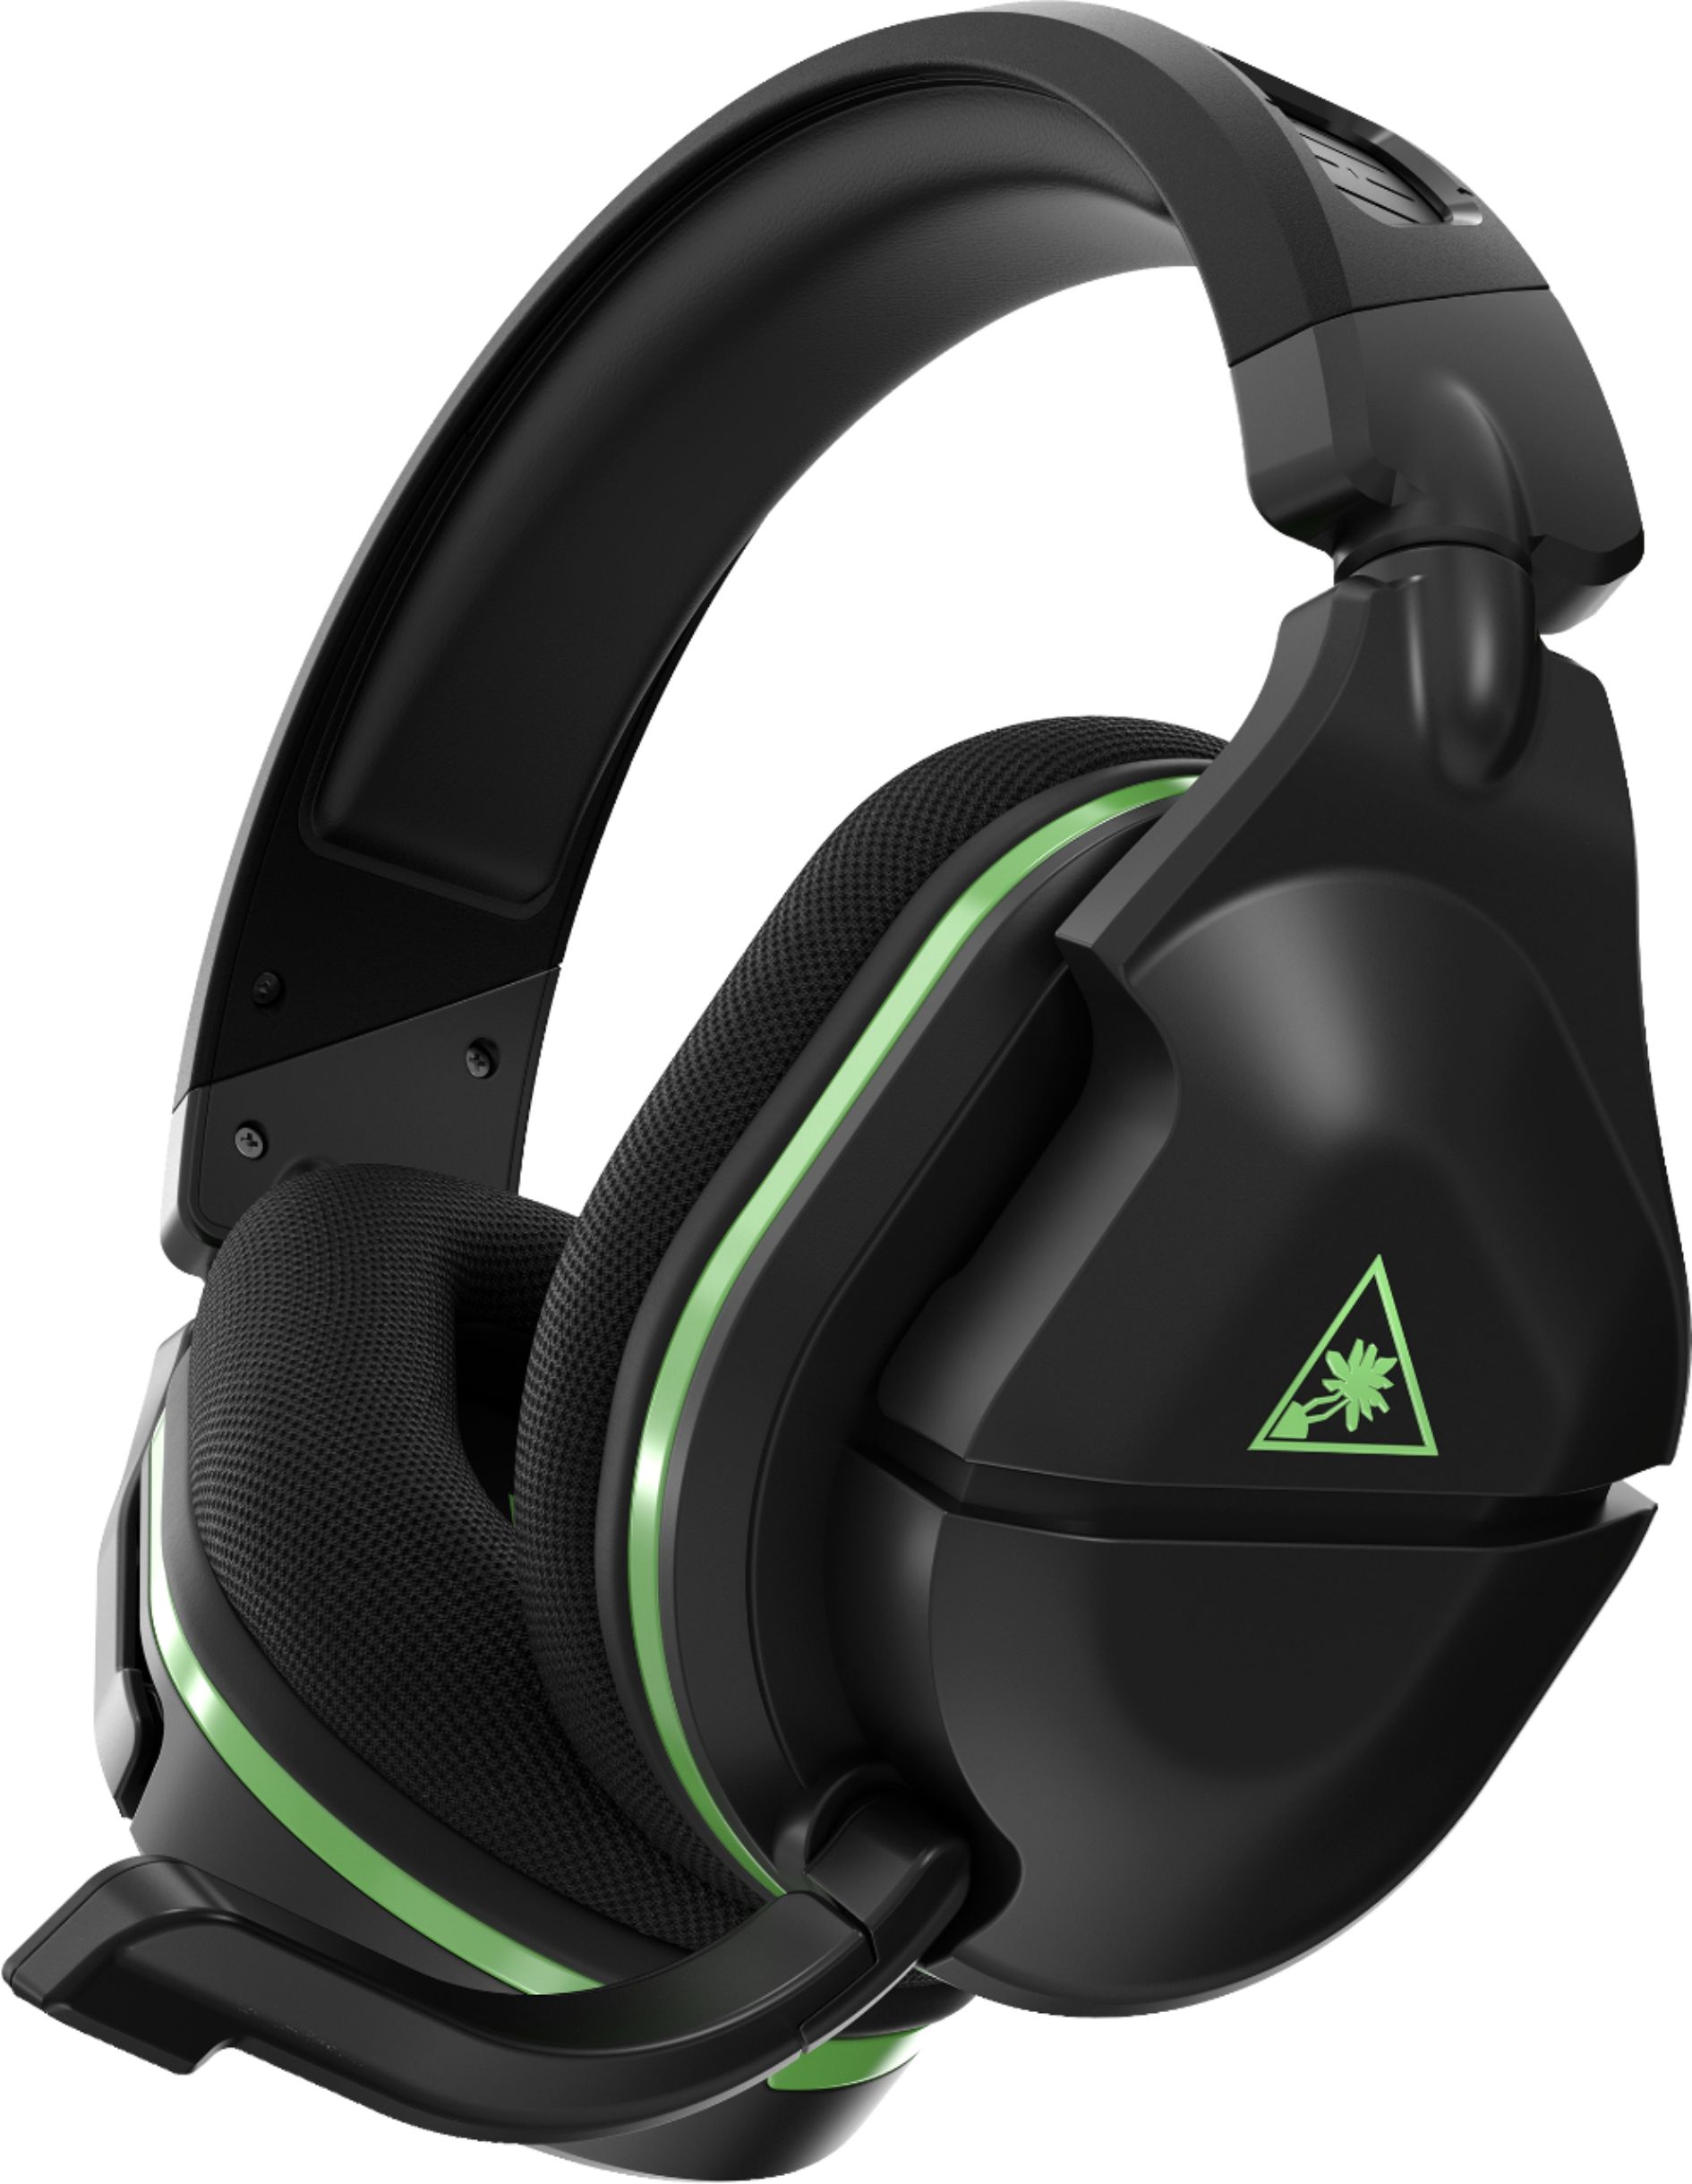 turtle beach headset xbox one connect